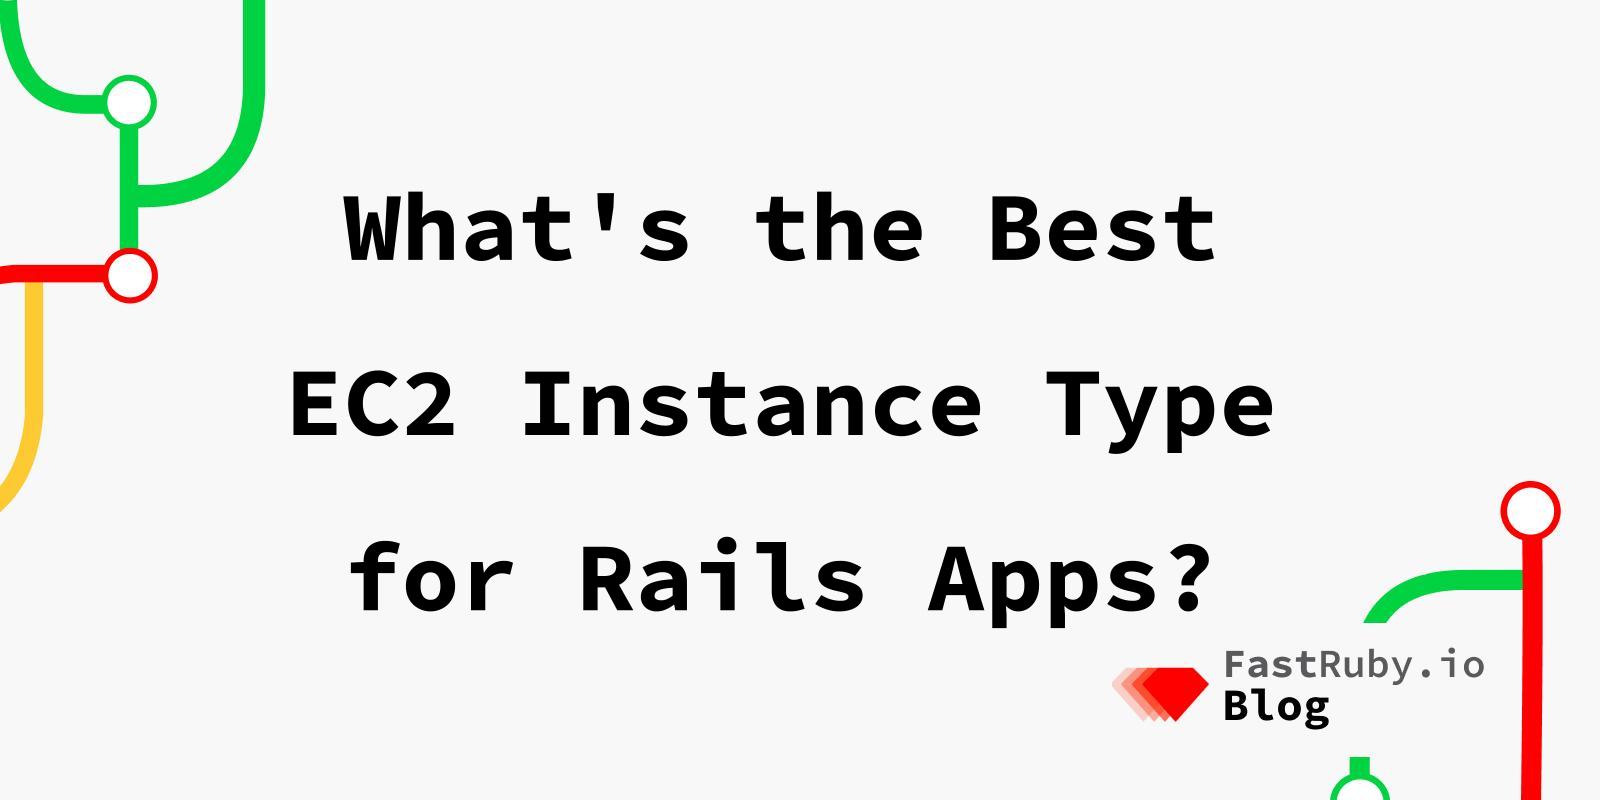 What's the Best EC2 Instance Type for Rails Apps?